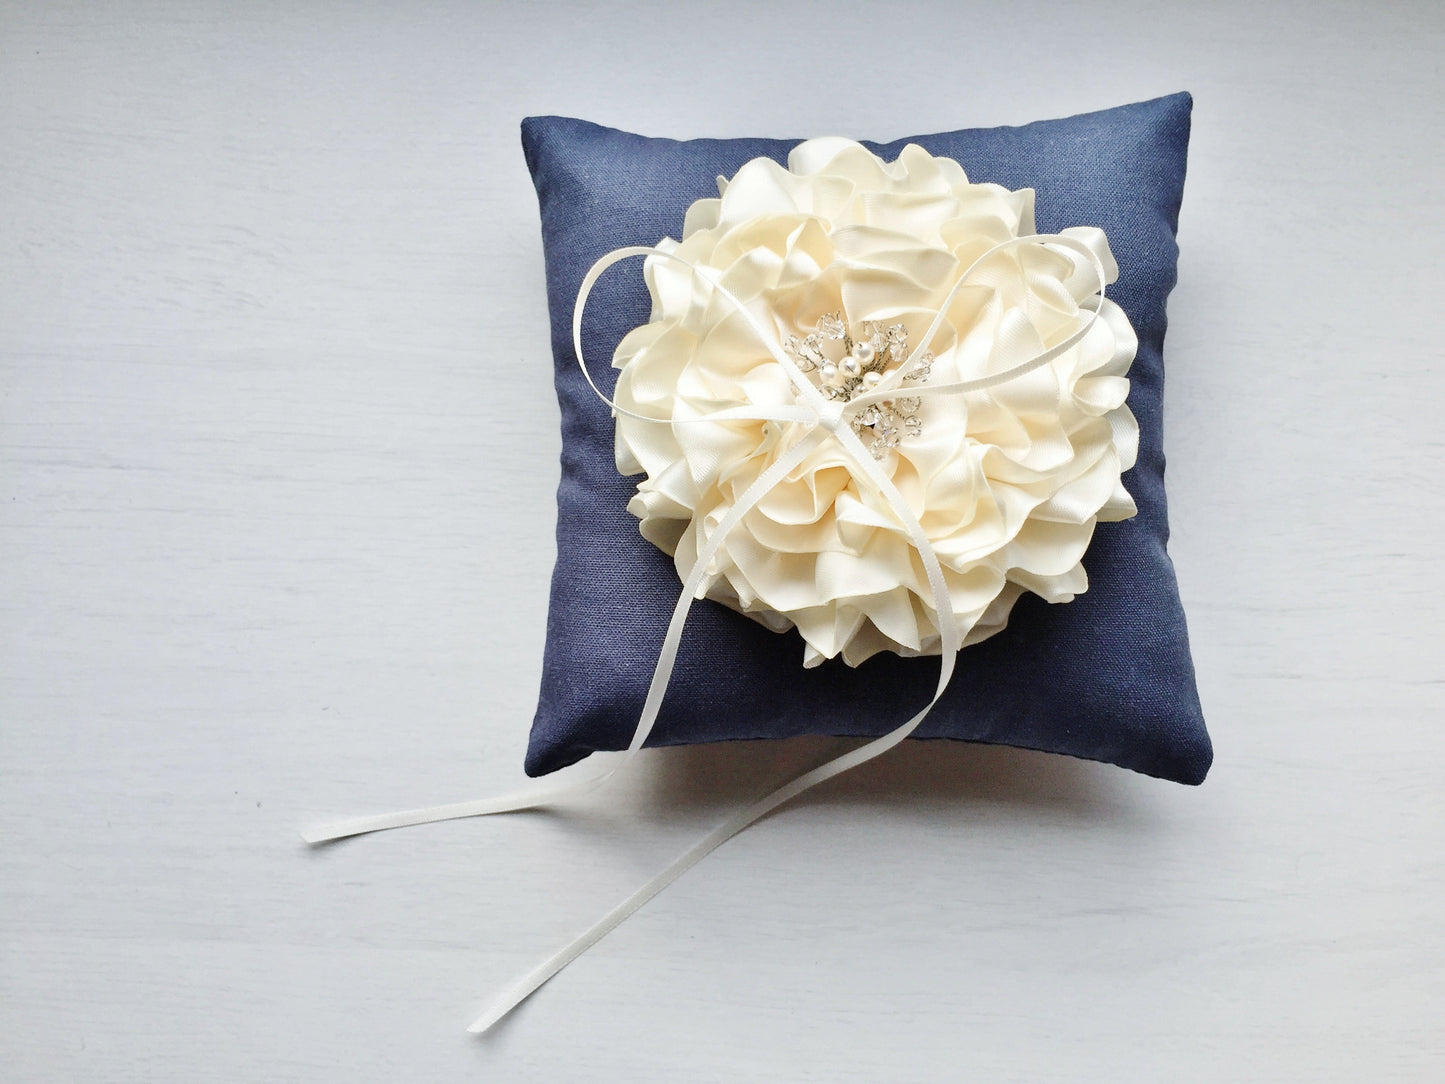 Signature Peony Ring Pillow in Antique Blue and Peony